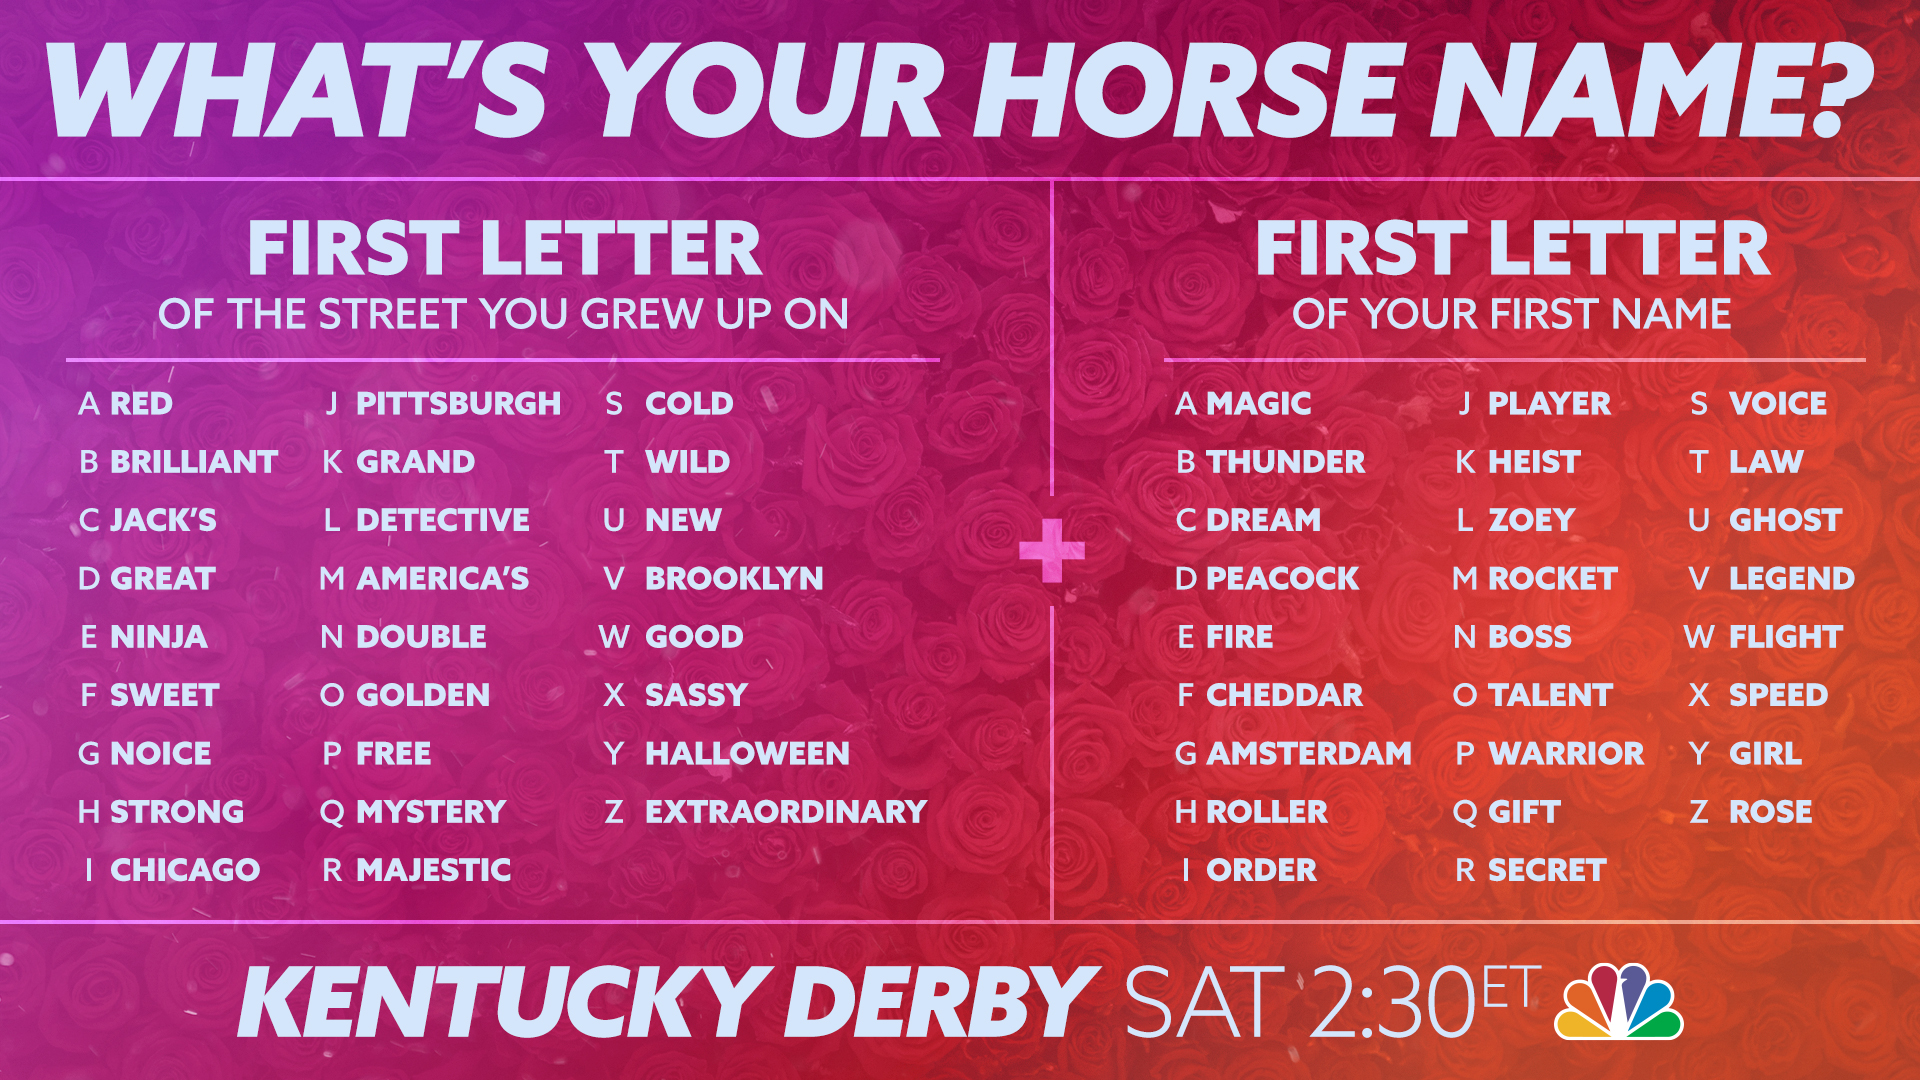 Nbc Sports If You Were Competing In The Kentuckyderby What Would Your Horse Name Be Get Ready To Derbyathome With Us Today At 2 30 P M Et On Nbc T Co 2fobg4ew4s